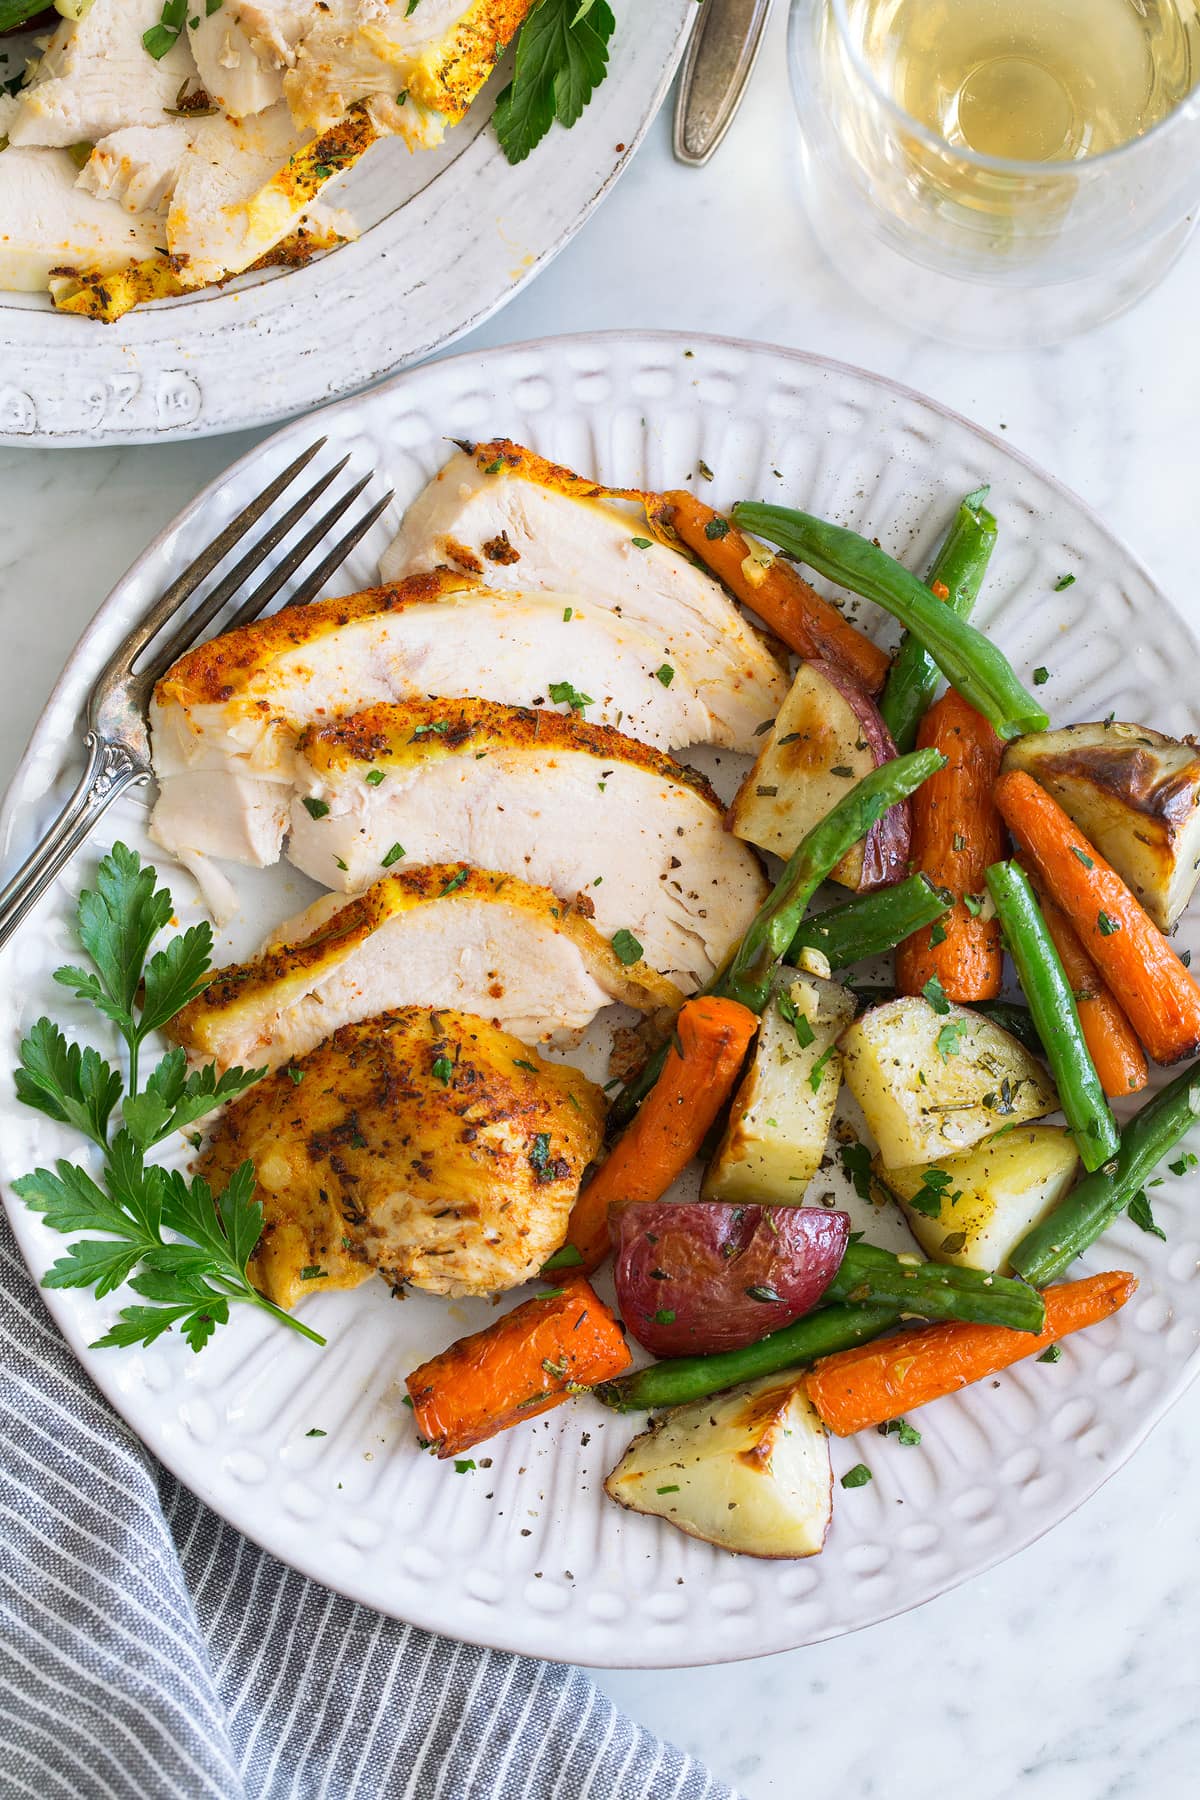 Rotisserie Style Chicken serving on plate with roasted veggies